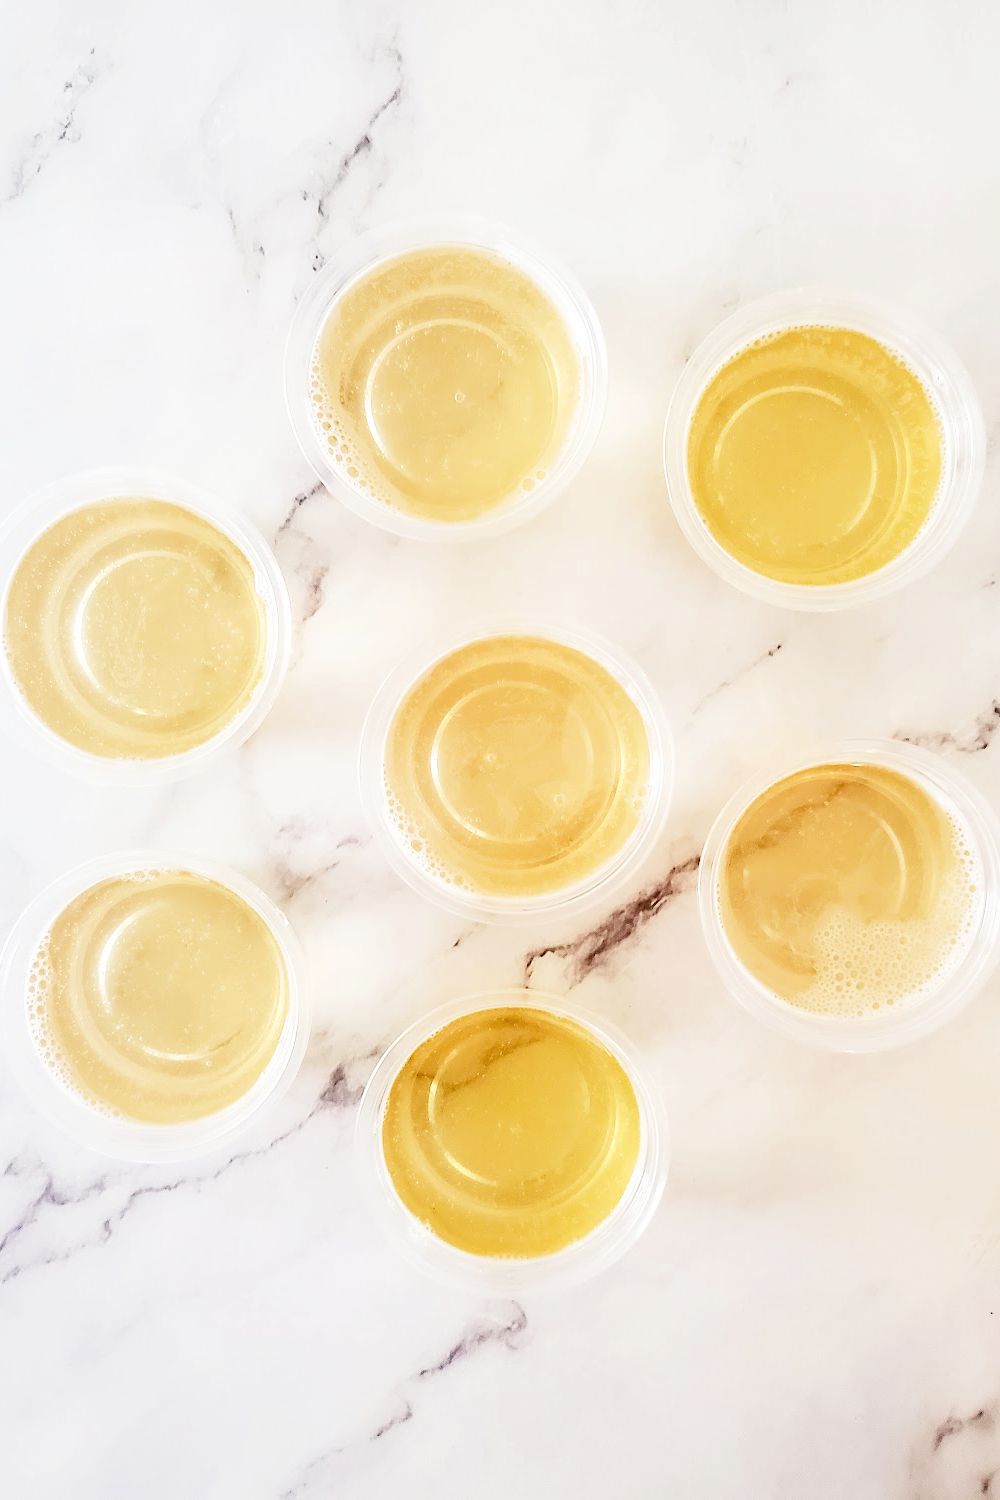 Adding the champagne mixture to the jello shot cups